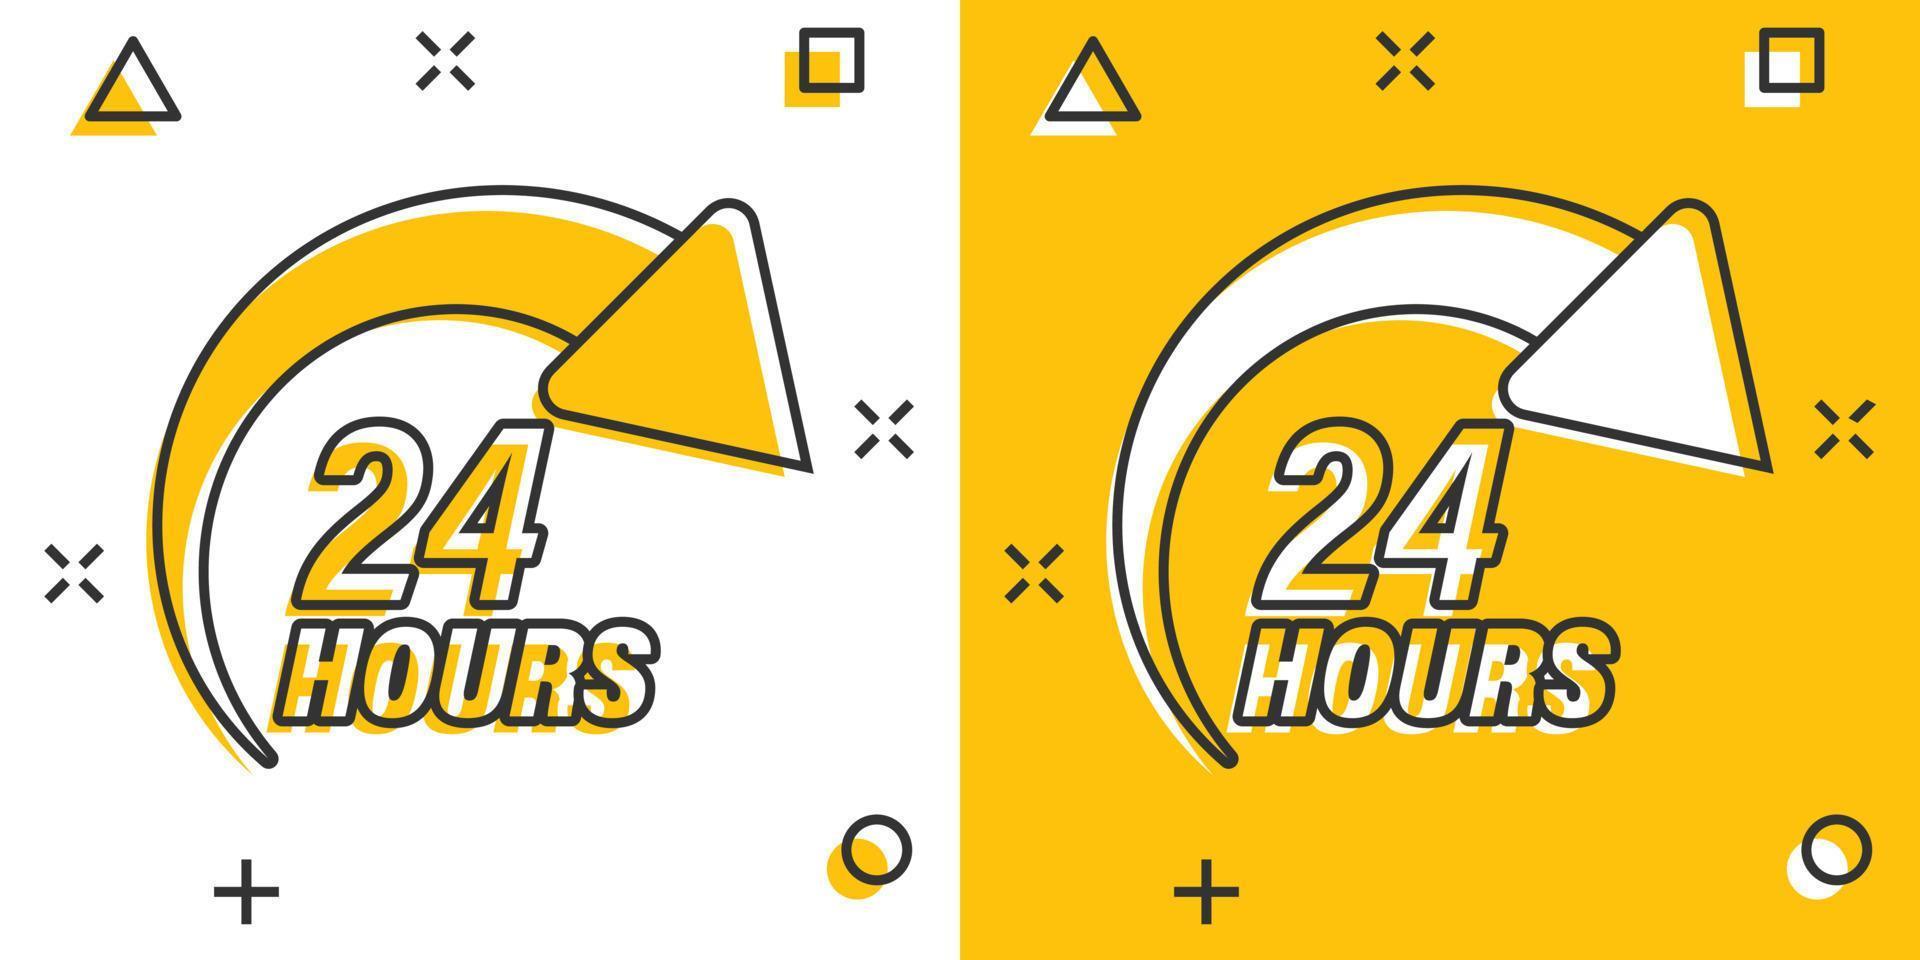 24 hours service icon in comic style. All day business and service cartoon vector illustration on isolated background. Quick service time splash effect sign business concept.